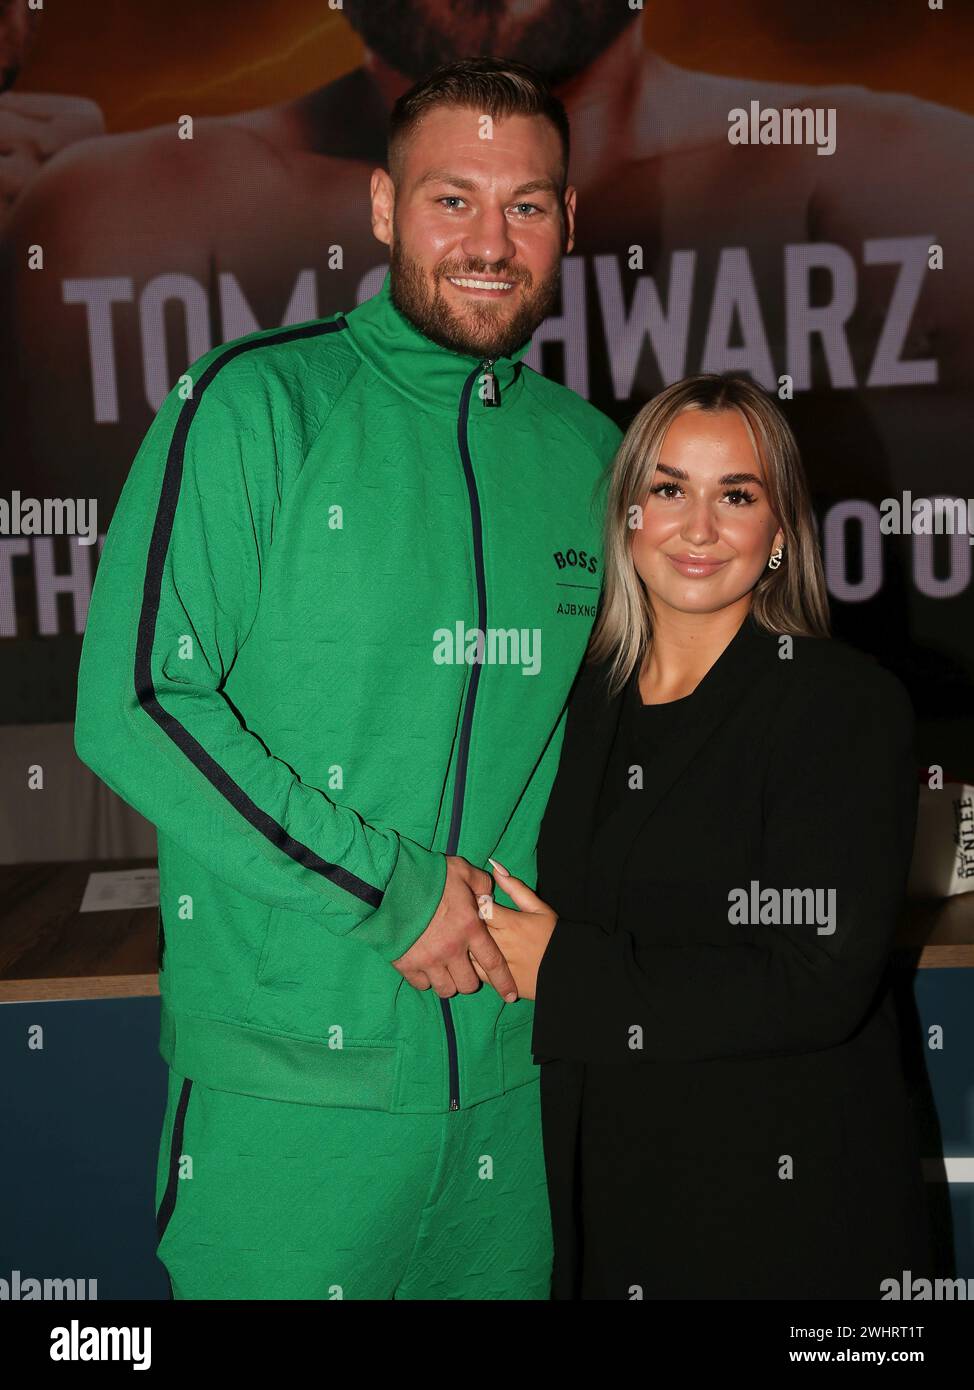 Boxer Tom Schwarz from the Magdeburg boxing stable Fides Sports with his wife Frederike at the press conference for THE SHOW MUS Stock Photo